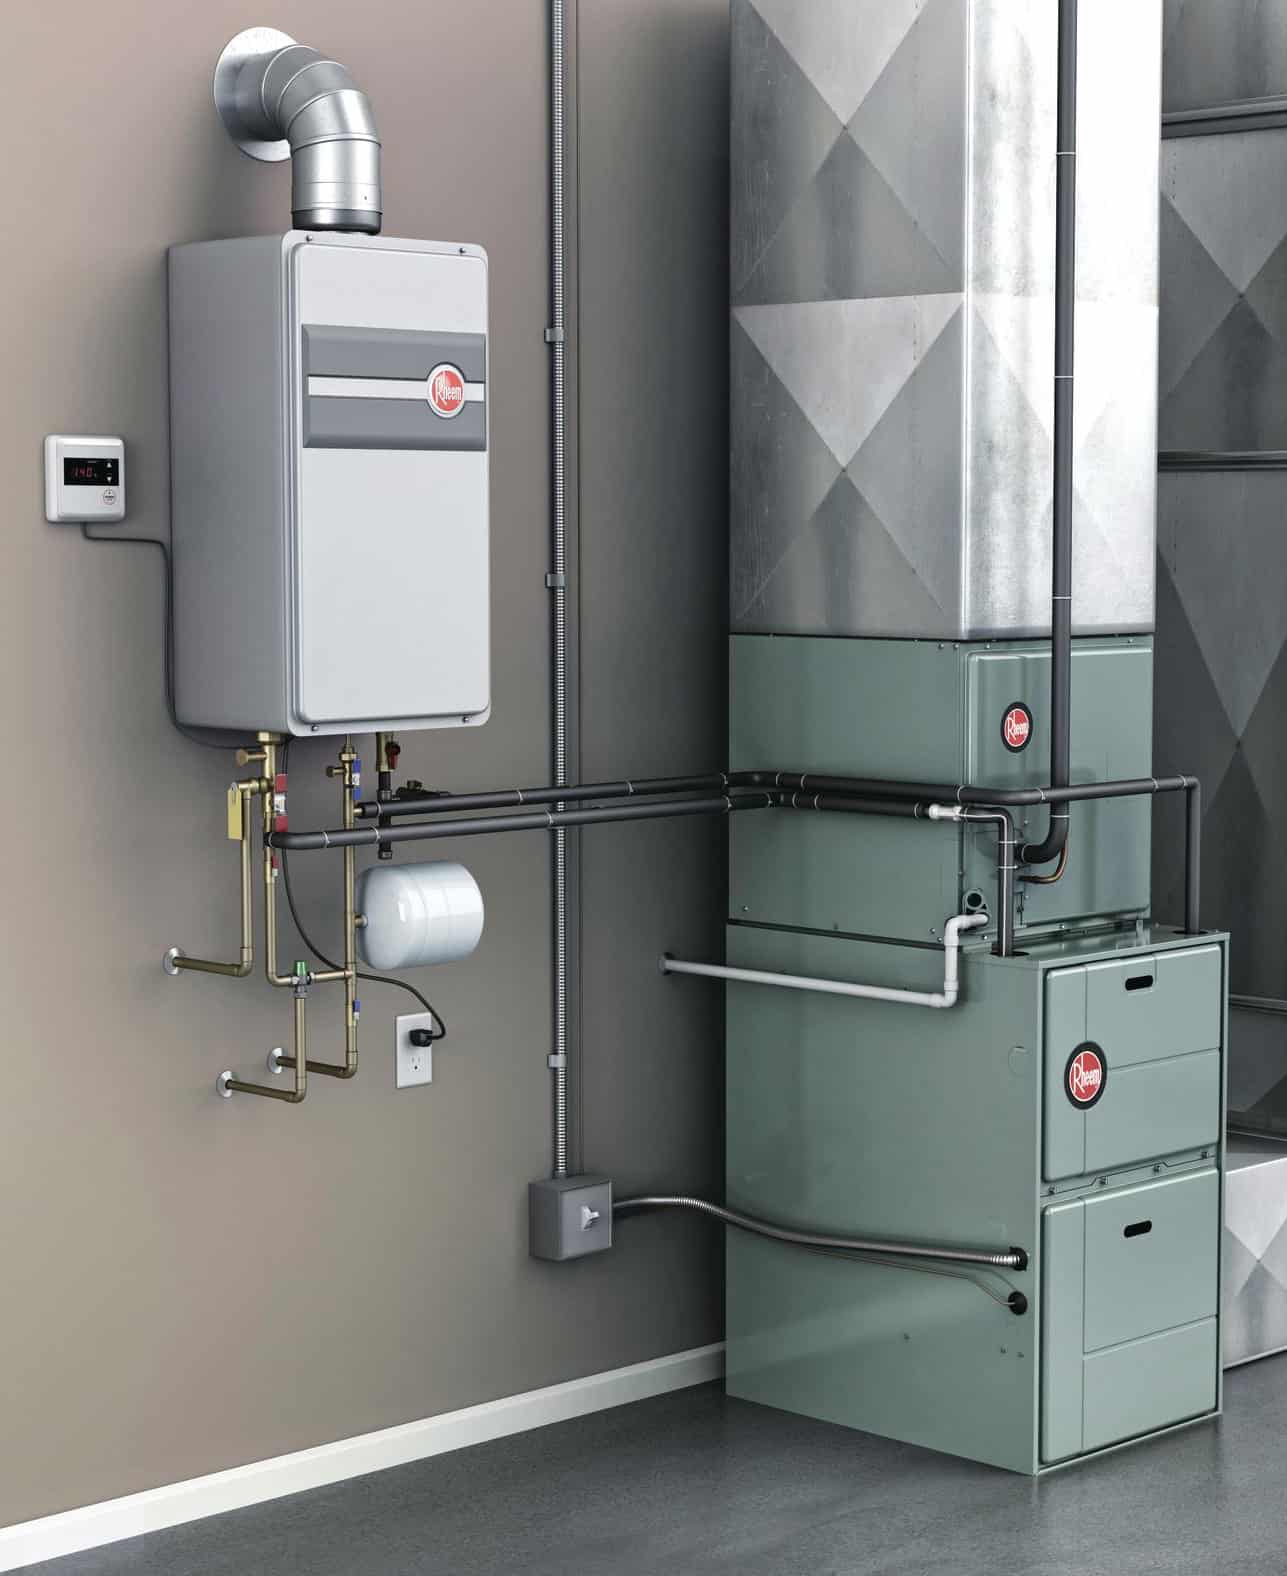 Rheem Tankless Water Heater Review | Home Buying Checklist